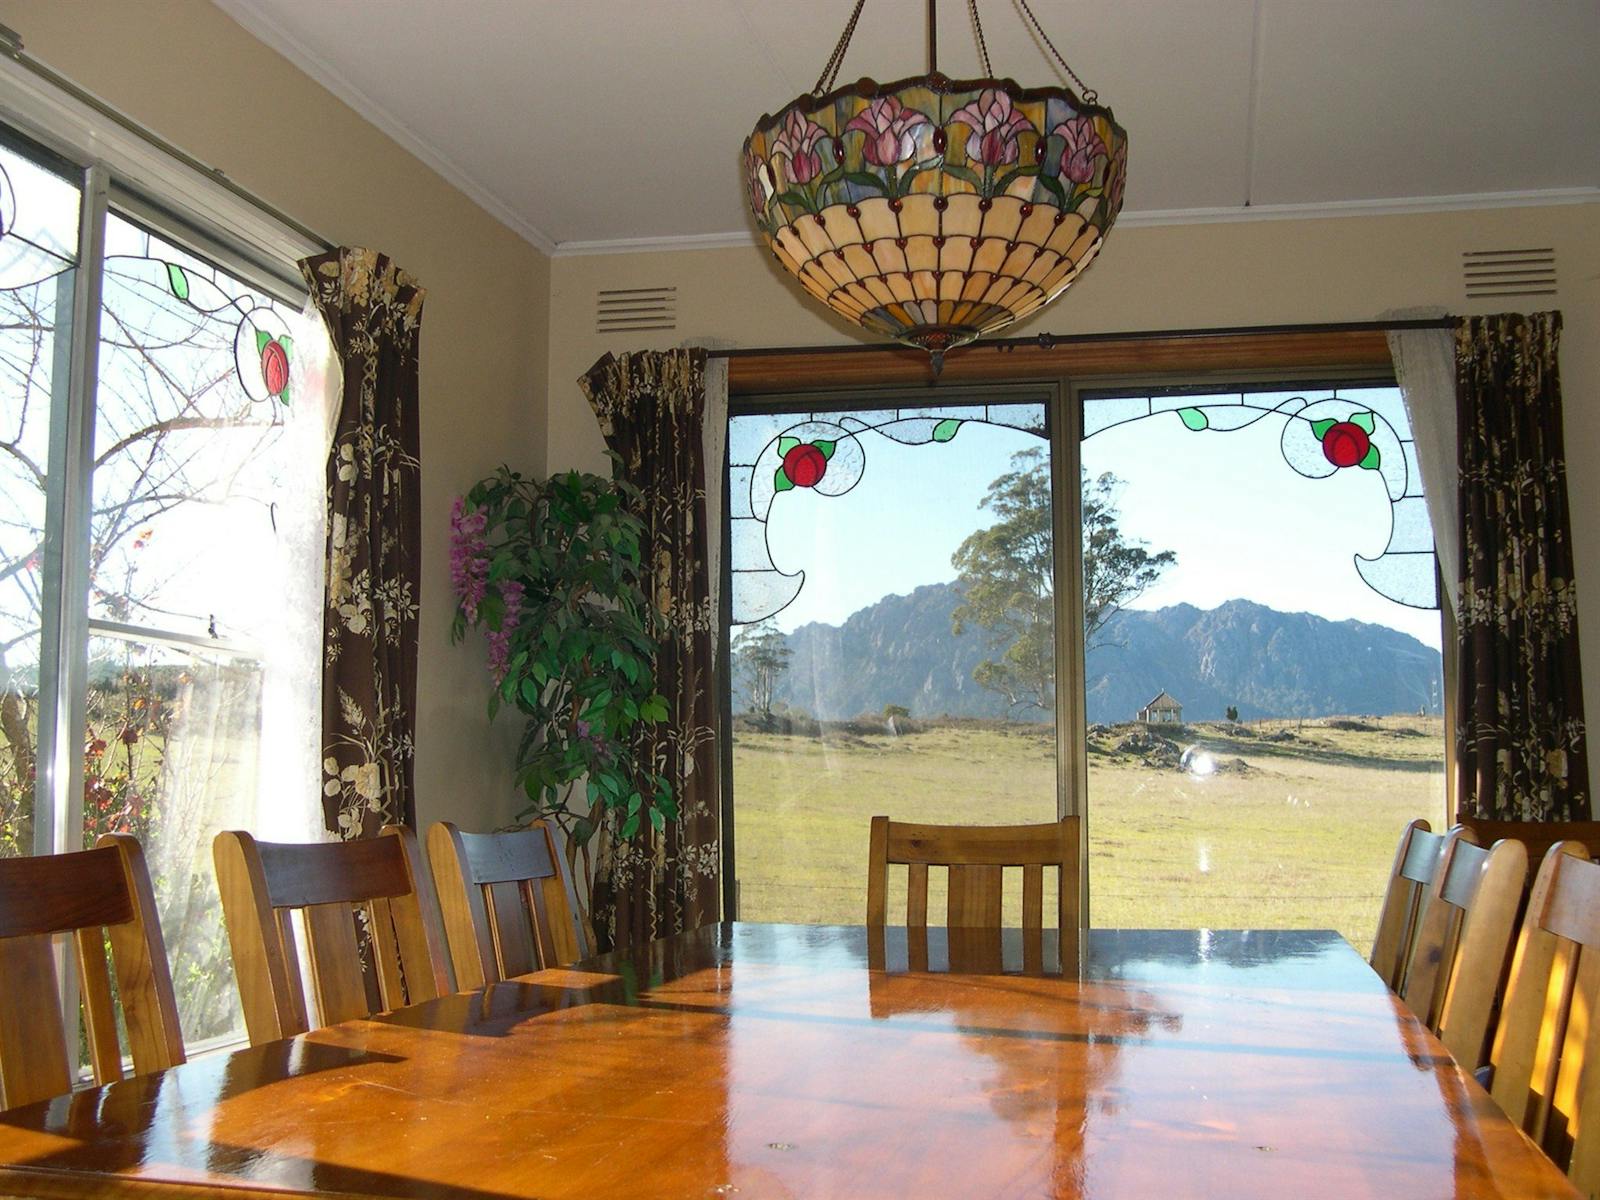 Dining rooms with Stained glass & great views